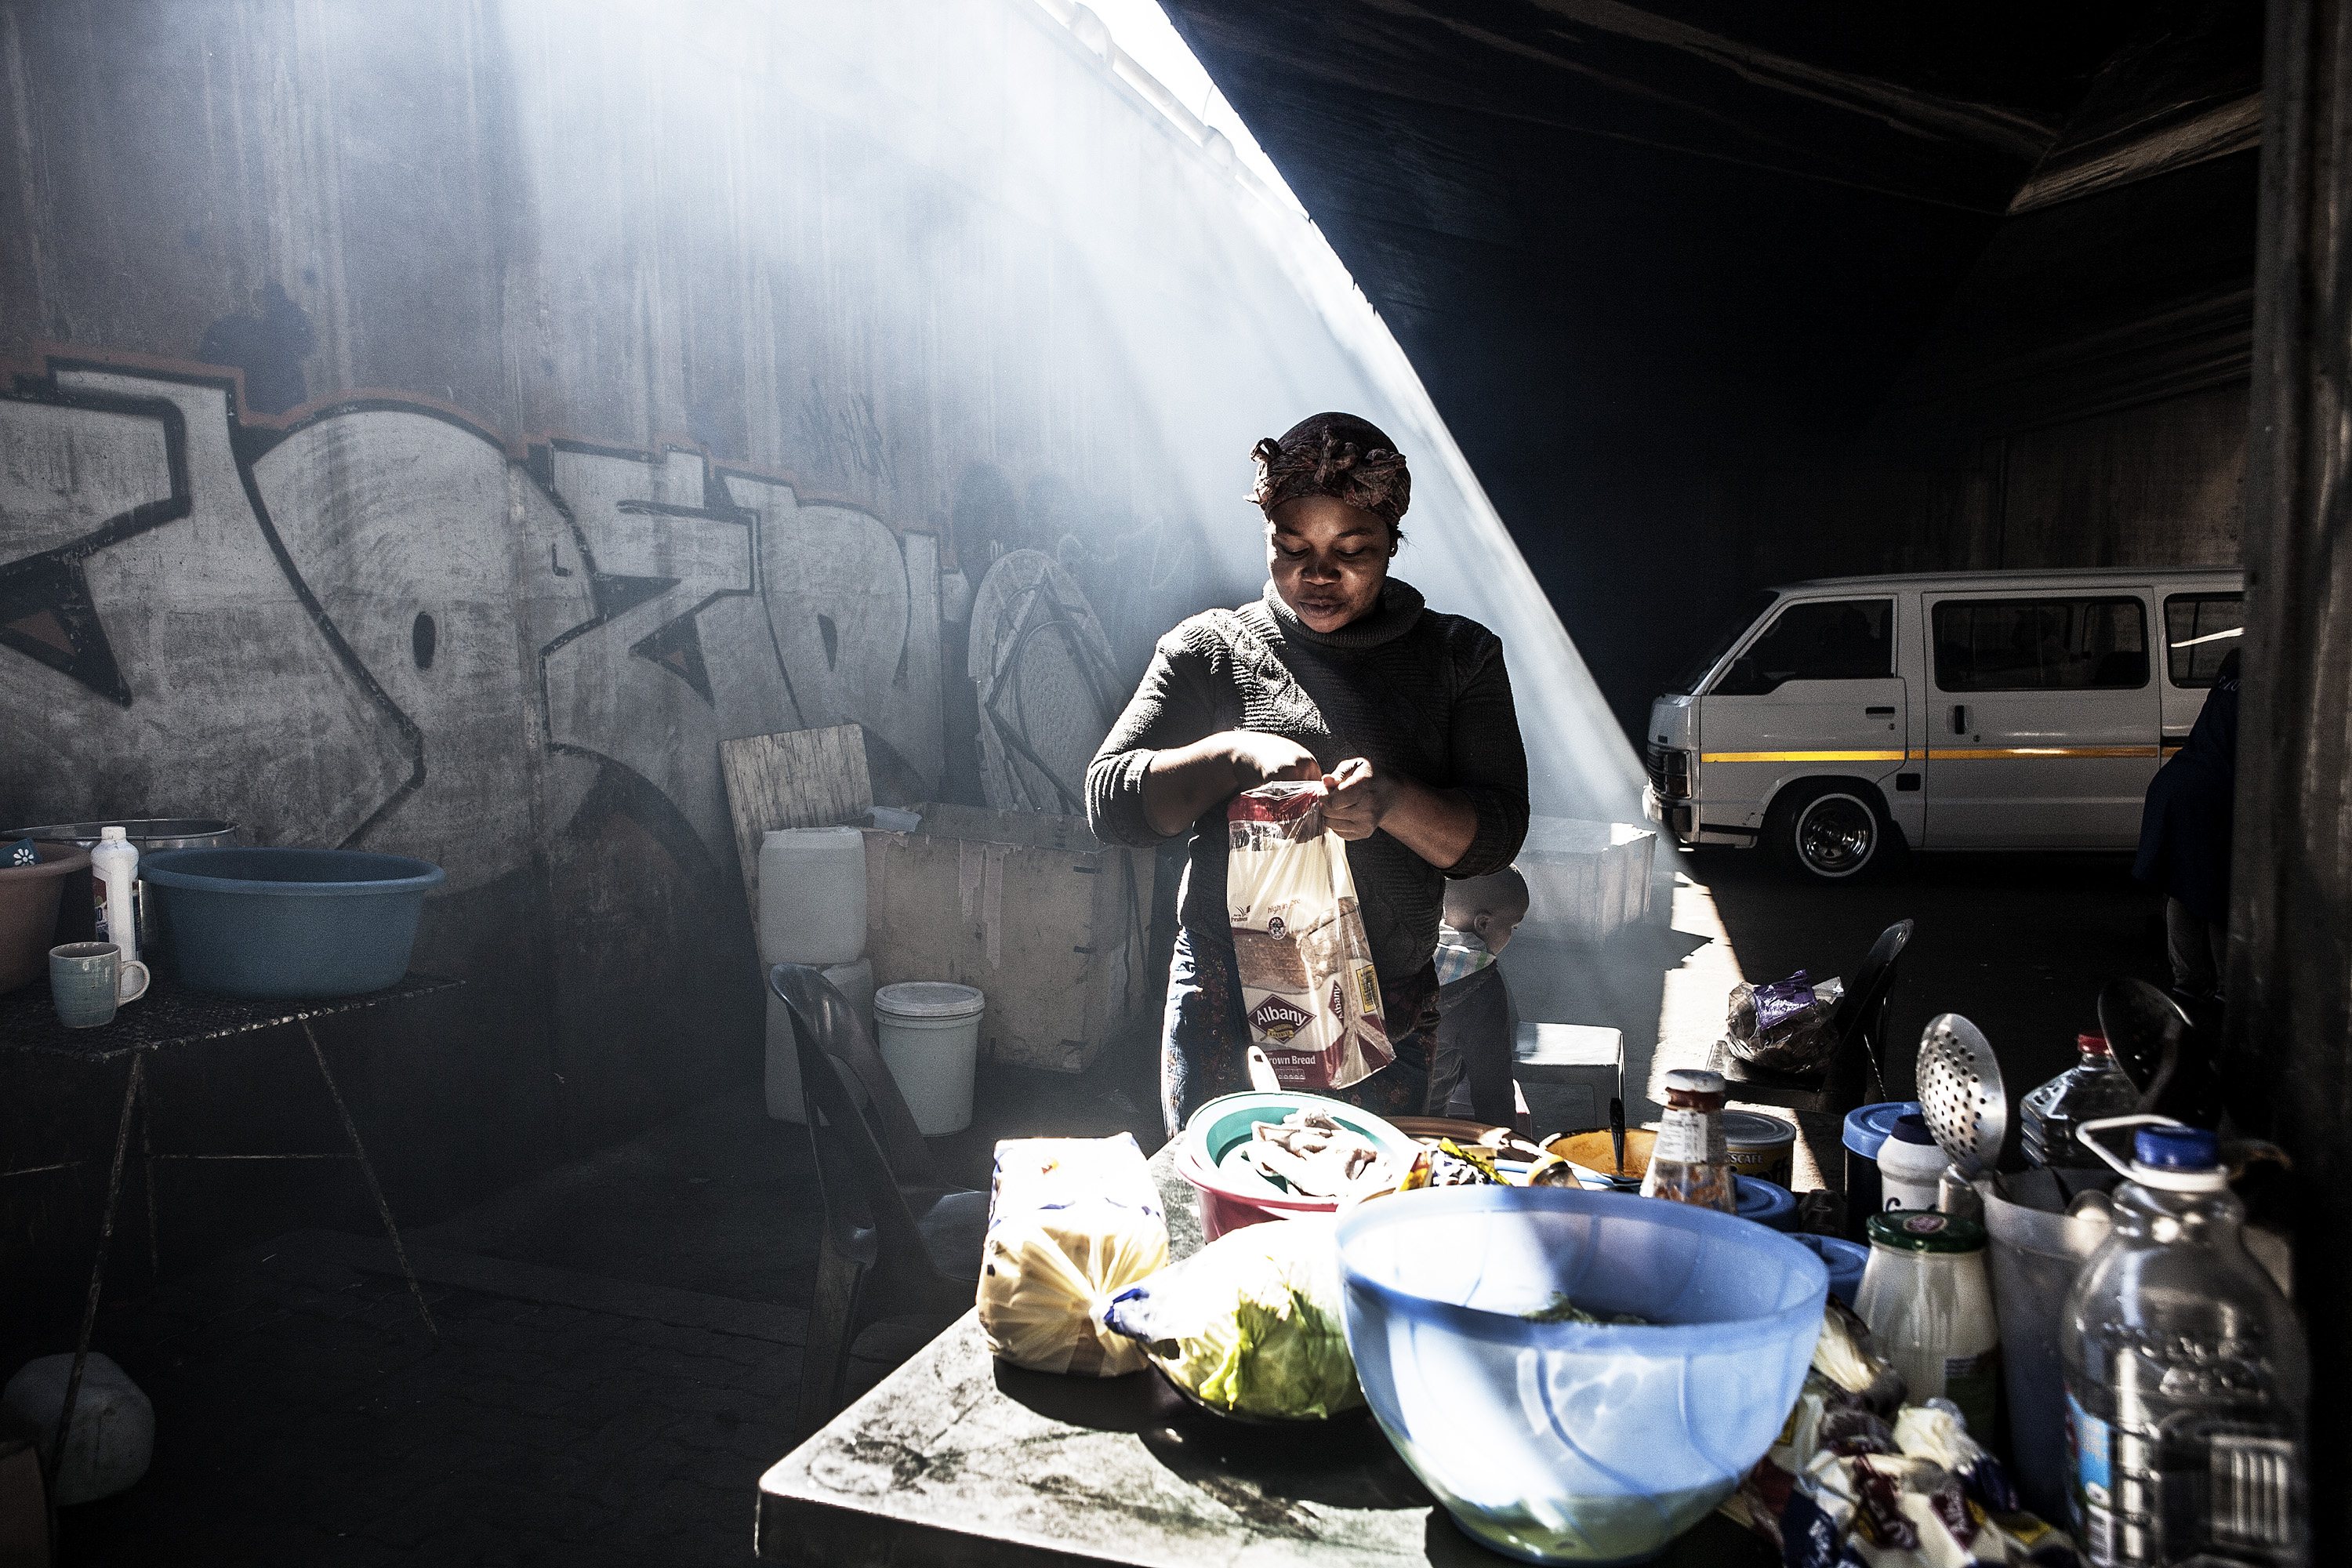 Monica Chauke serves customised breakfasts, from 'Wake Up, This Is Joburg'. Image: Mark Lewis